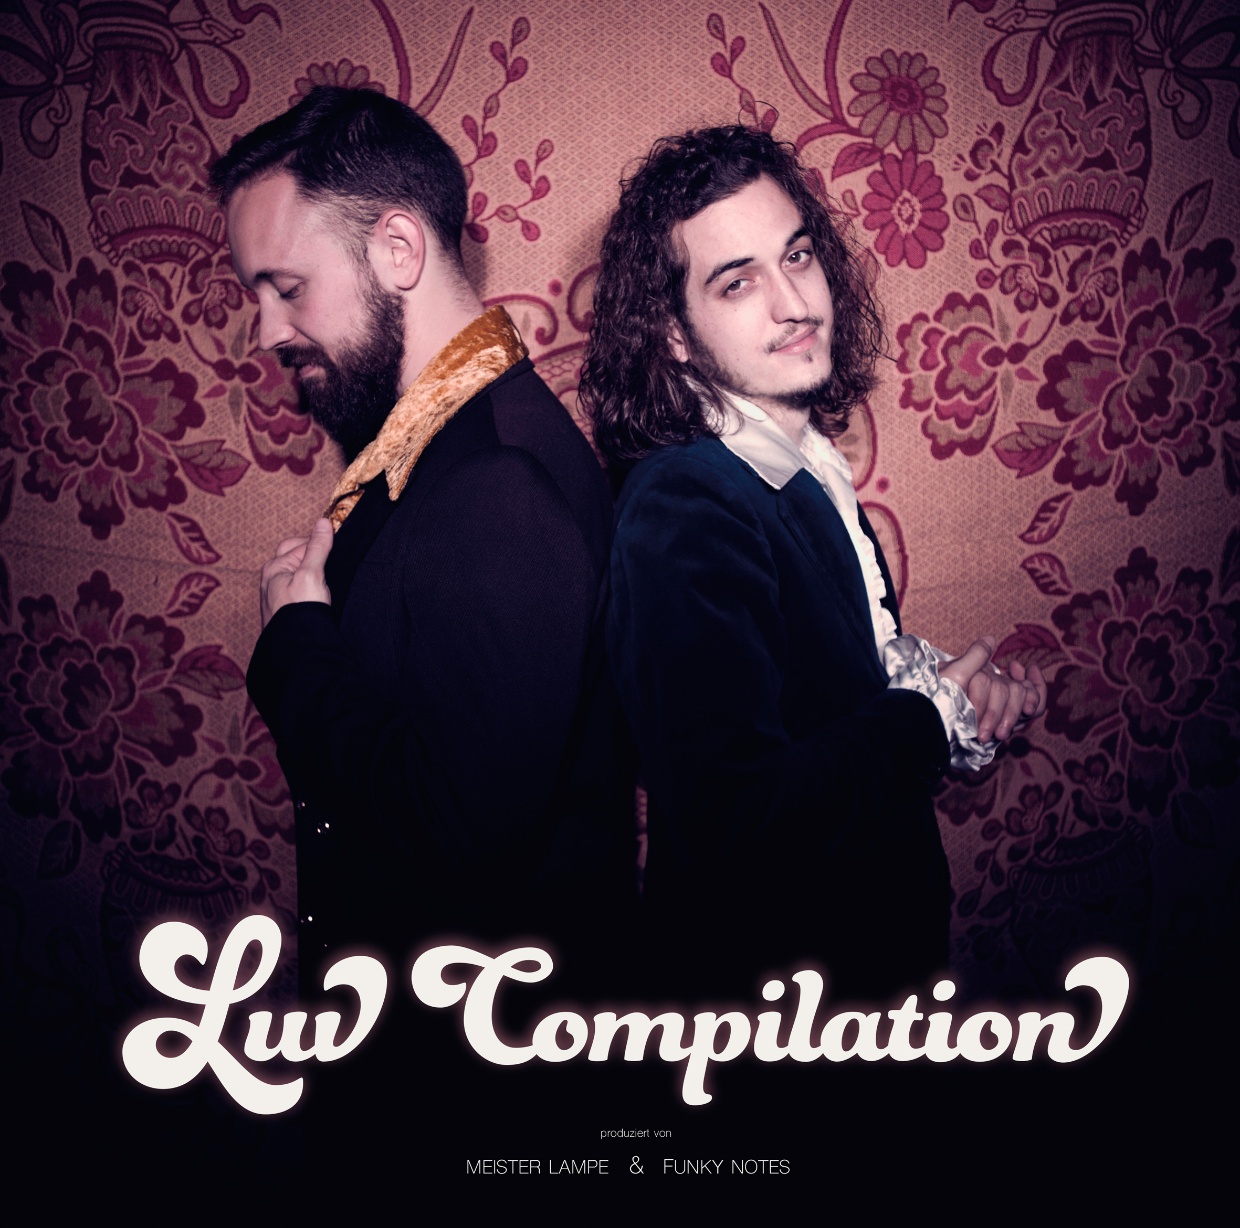 Meister Lampe & Funky Notes – Luv Compilation (Cover)